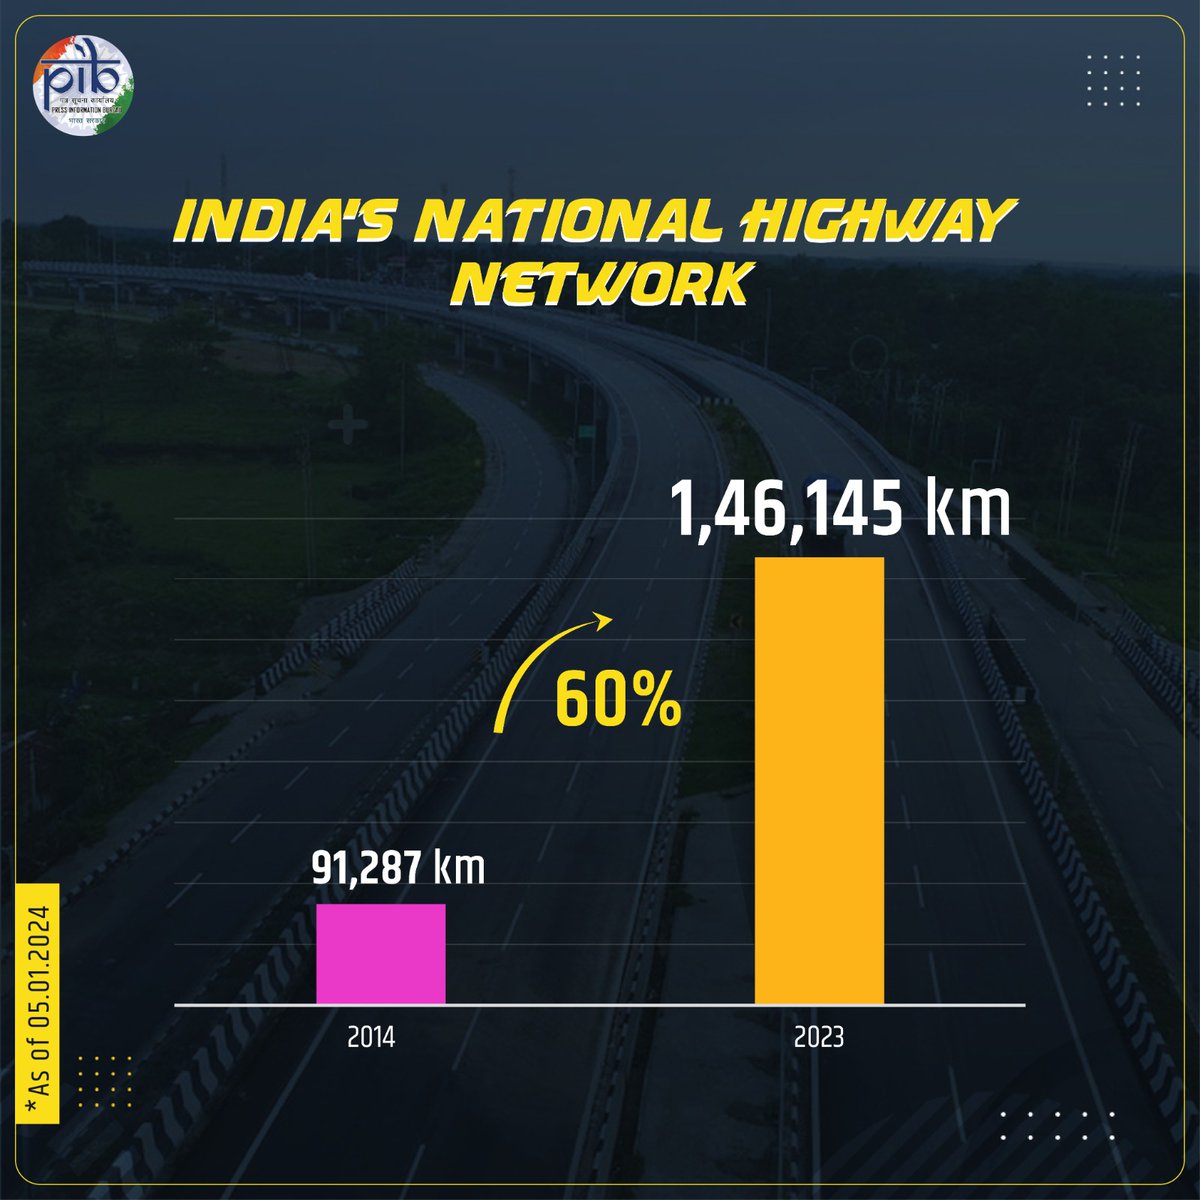 .@MORTHIndia and its implementing agencies have undertaken multiple initiatives in last 9 years to augment the capacity of the National Highway (NH) infrastructure in India ➡️NH network increased by 60% from 91,287 km in 2014 to 1,46,145 km in year 2023 Details:…